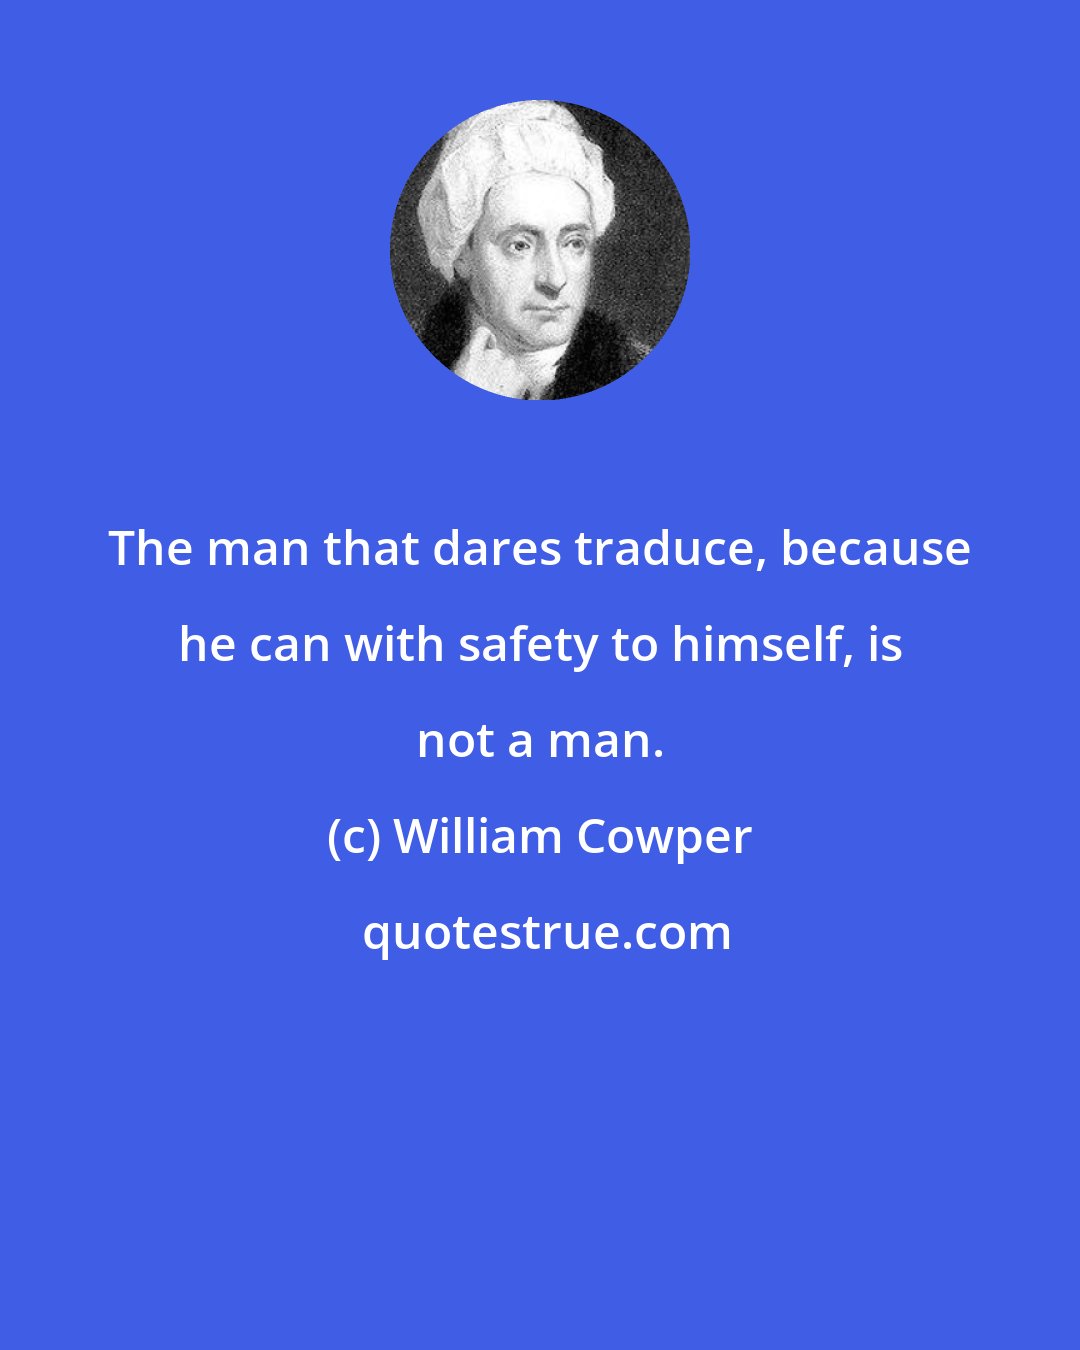 William Cowper: The man that dares traduce, because he can with safety to himself, is not a man.